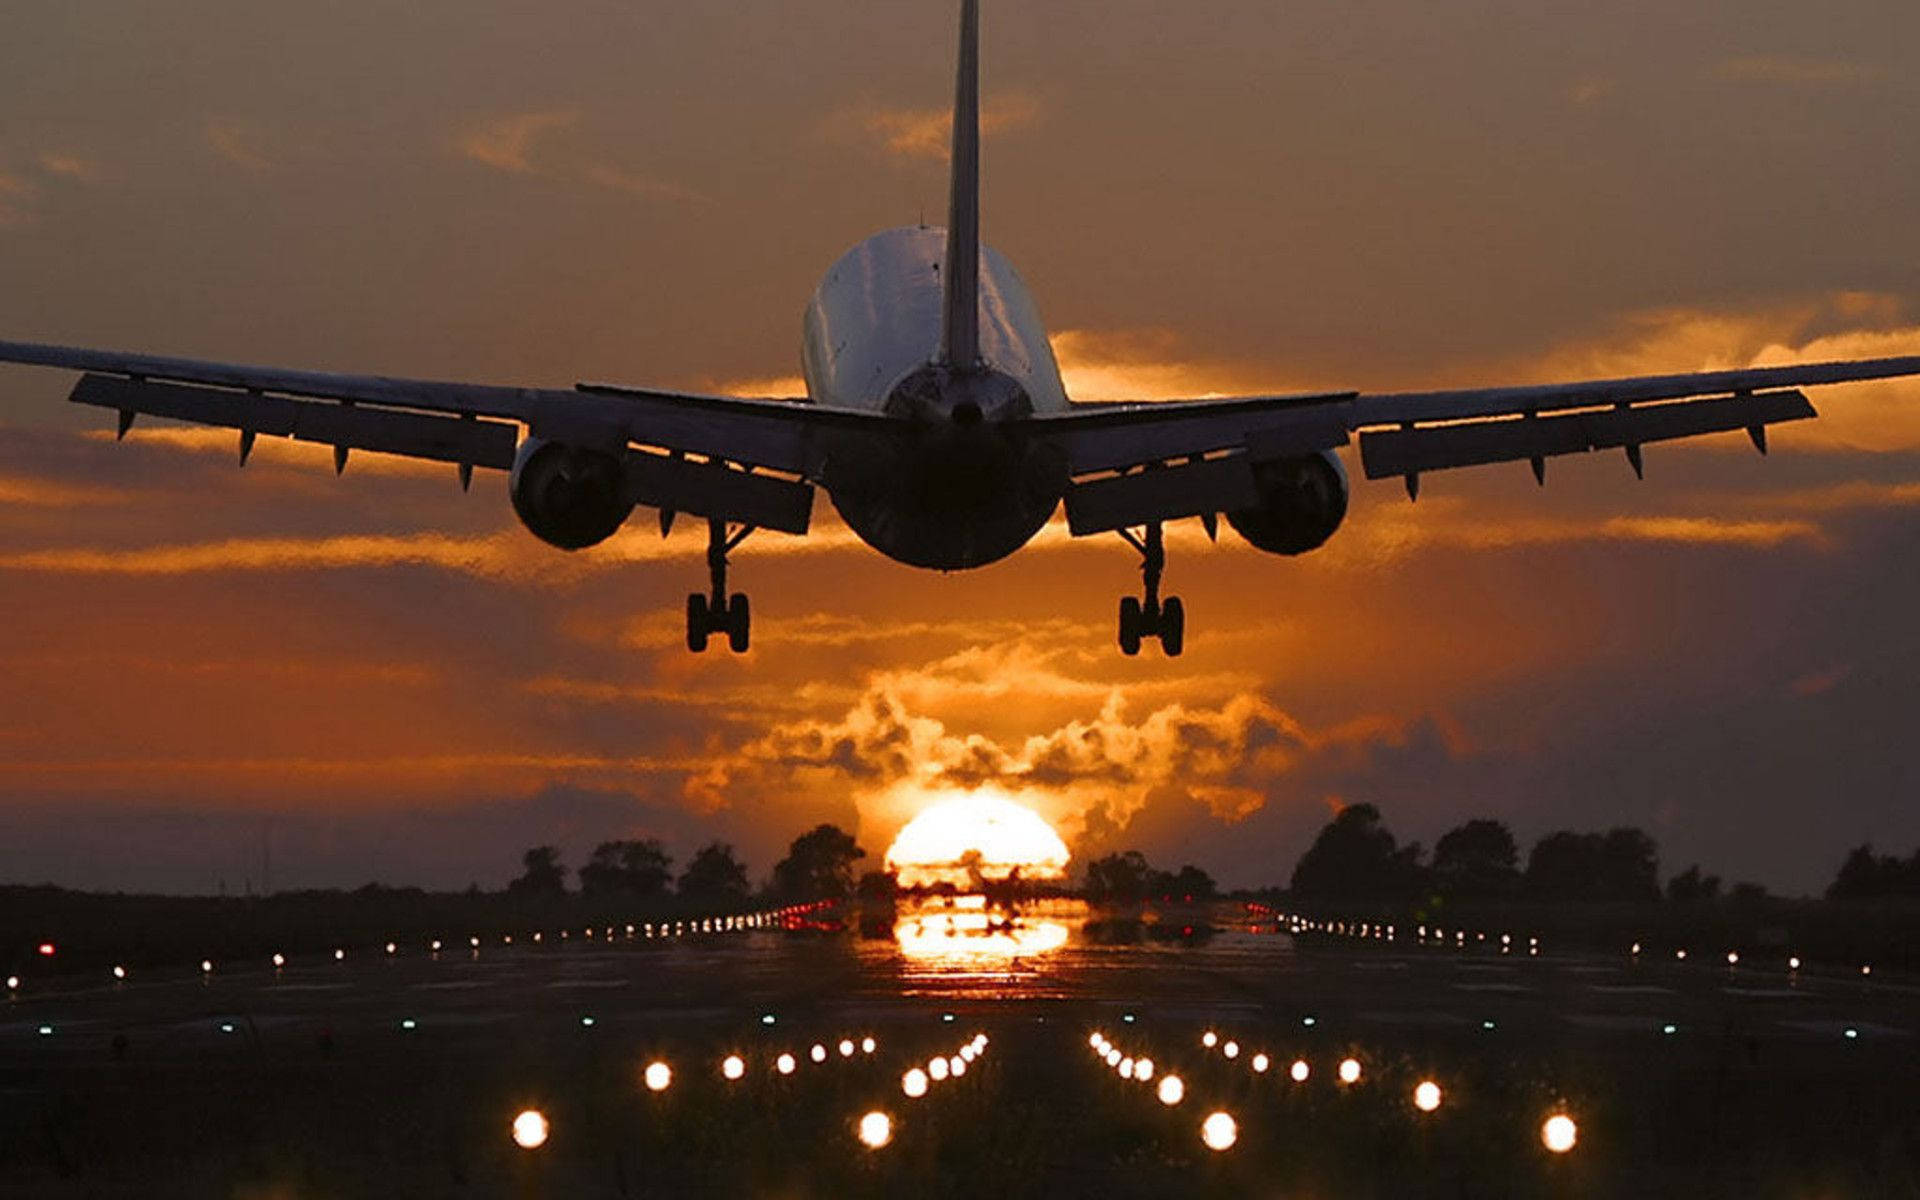 An Incredible Sunset View Of An Airplane Making A Final Descent. Background